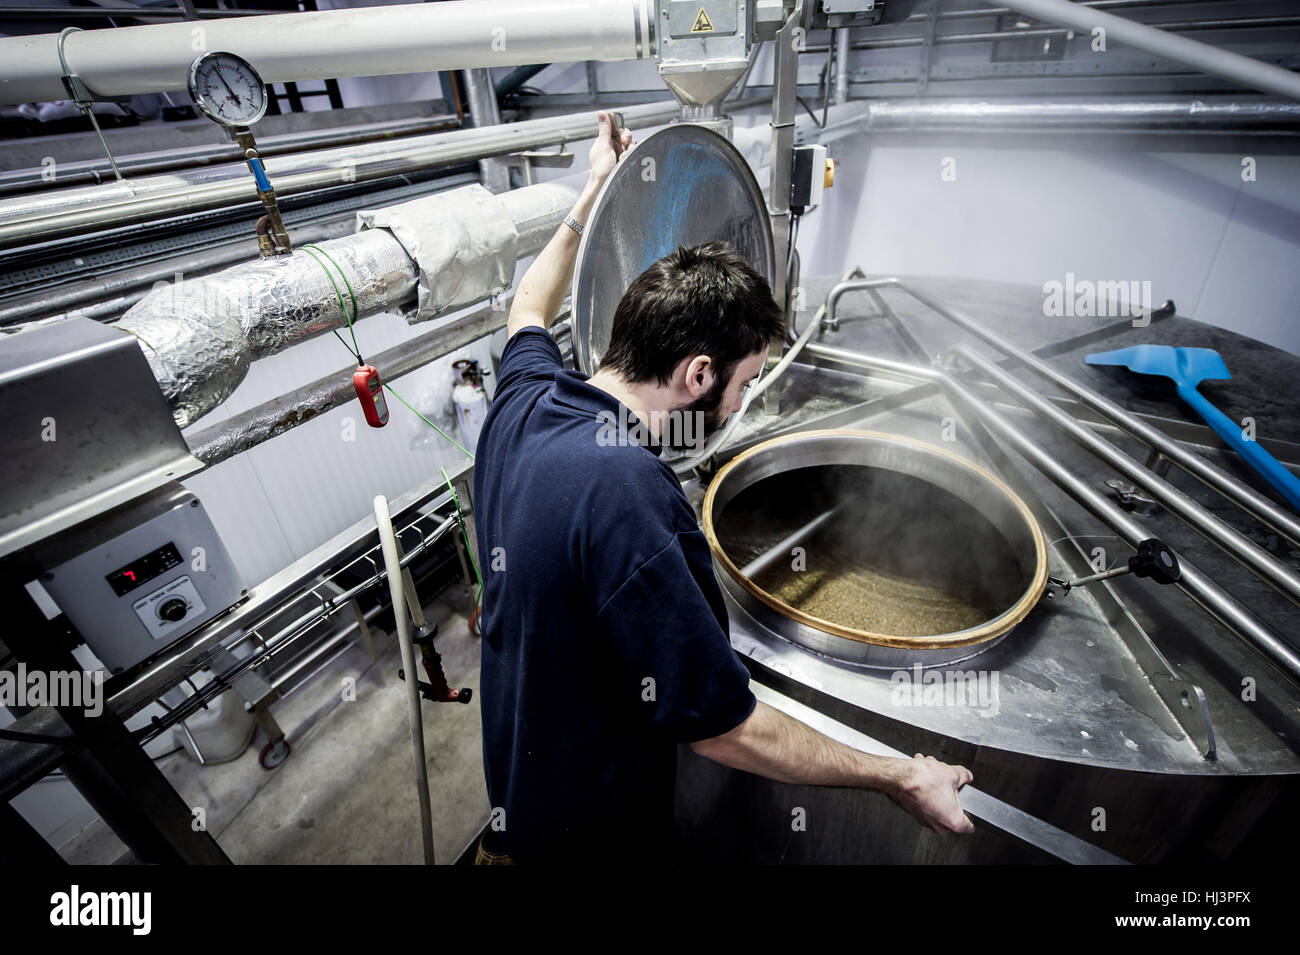 Beer brewing production at various stages from grain to bottle. Stock Photo